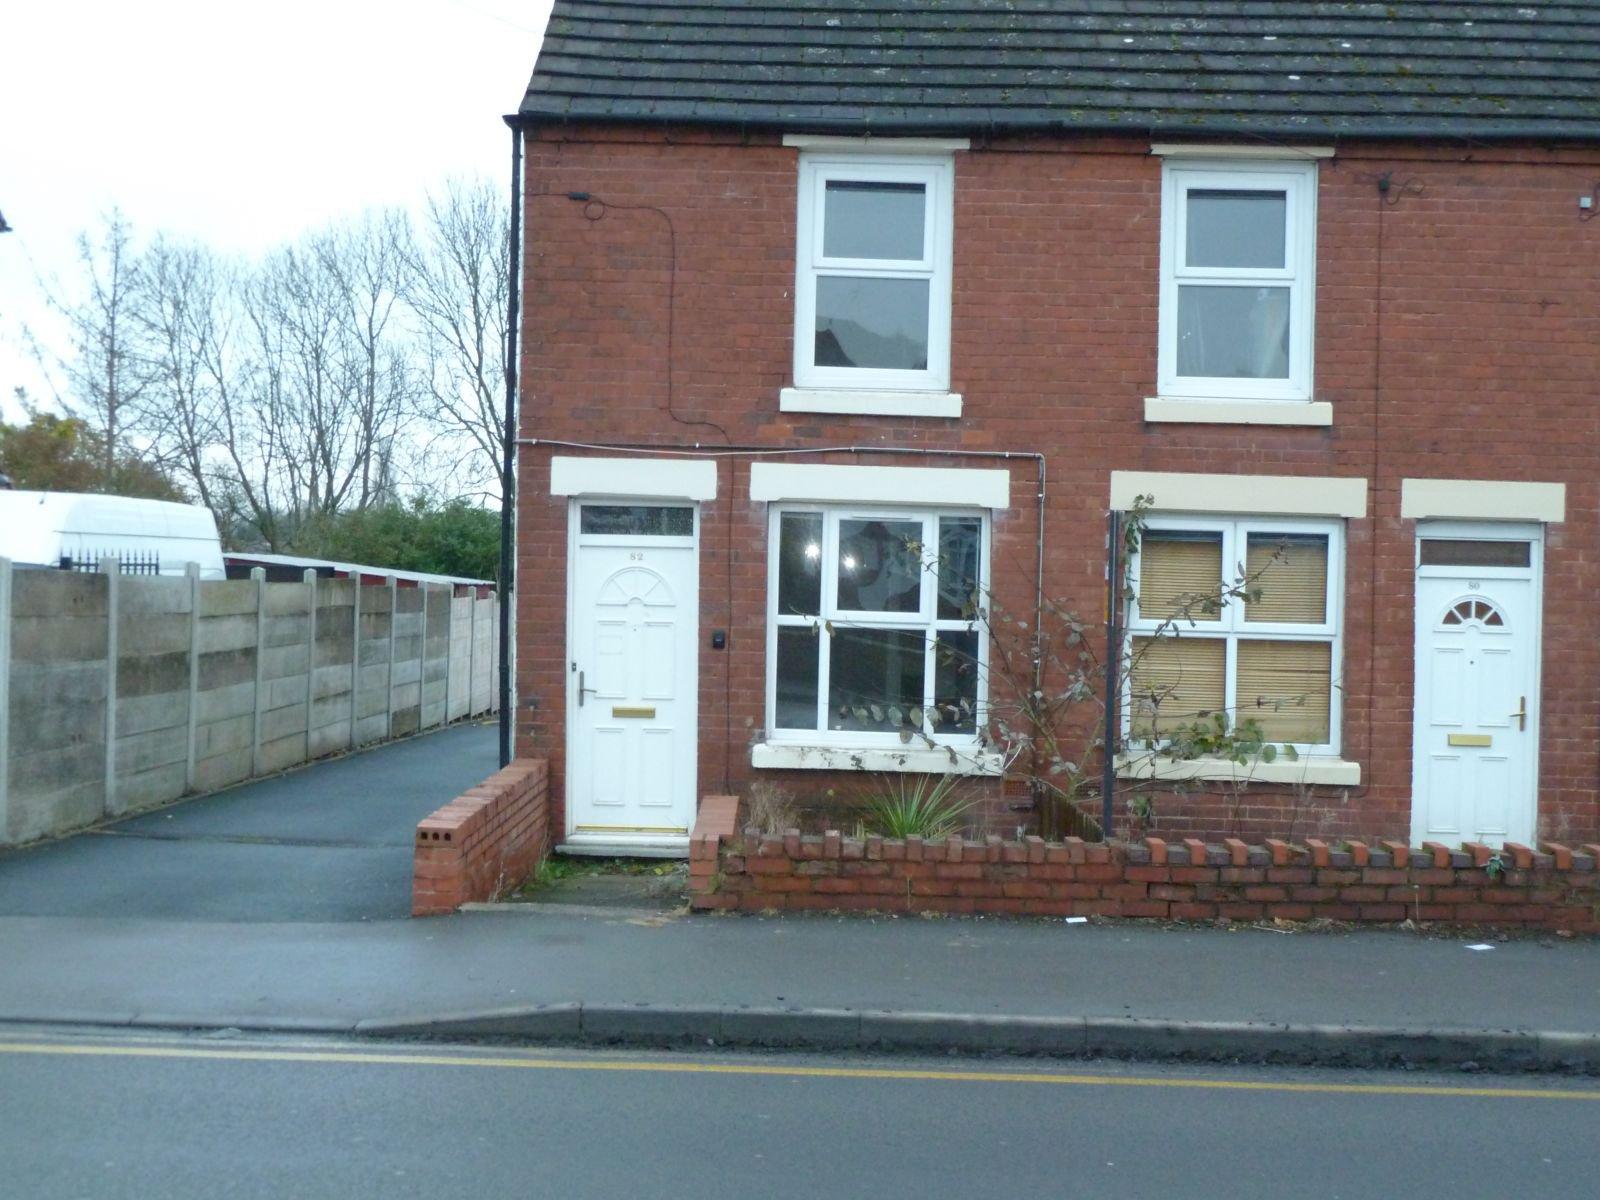 Cannock Road, Cannock, Staffordshire, WS11 5BY